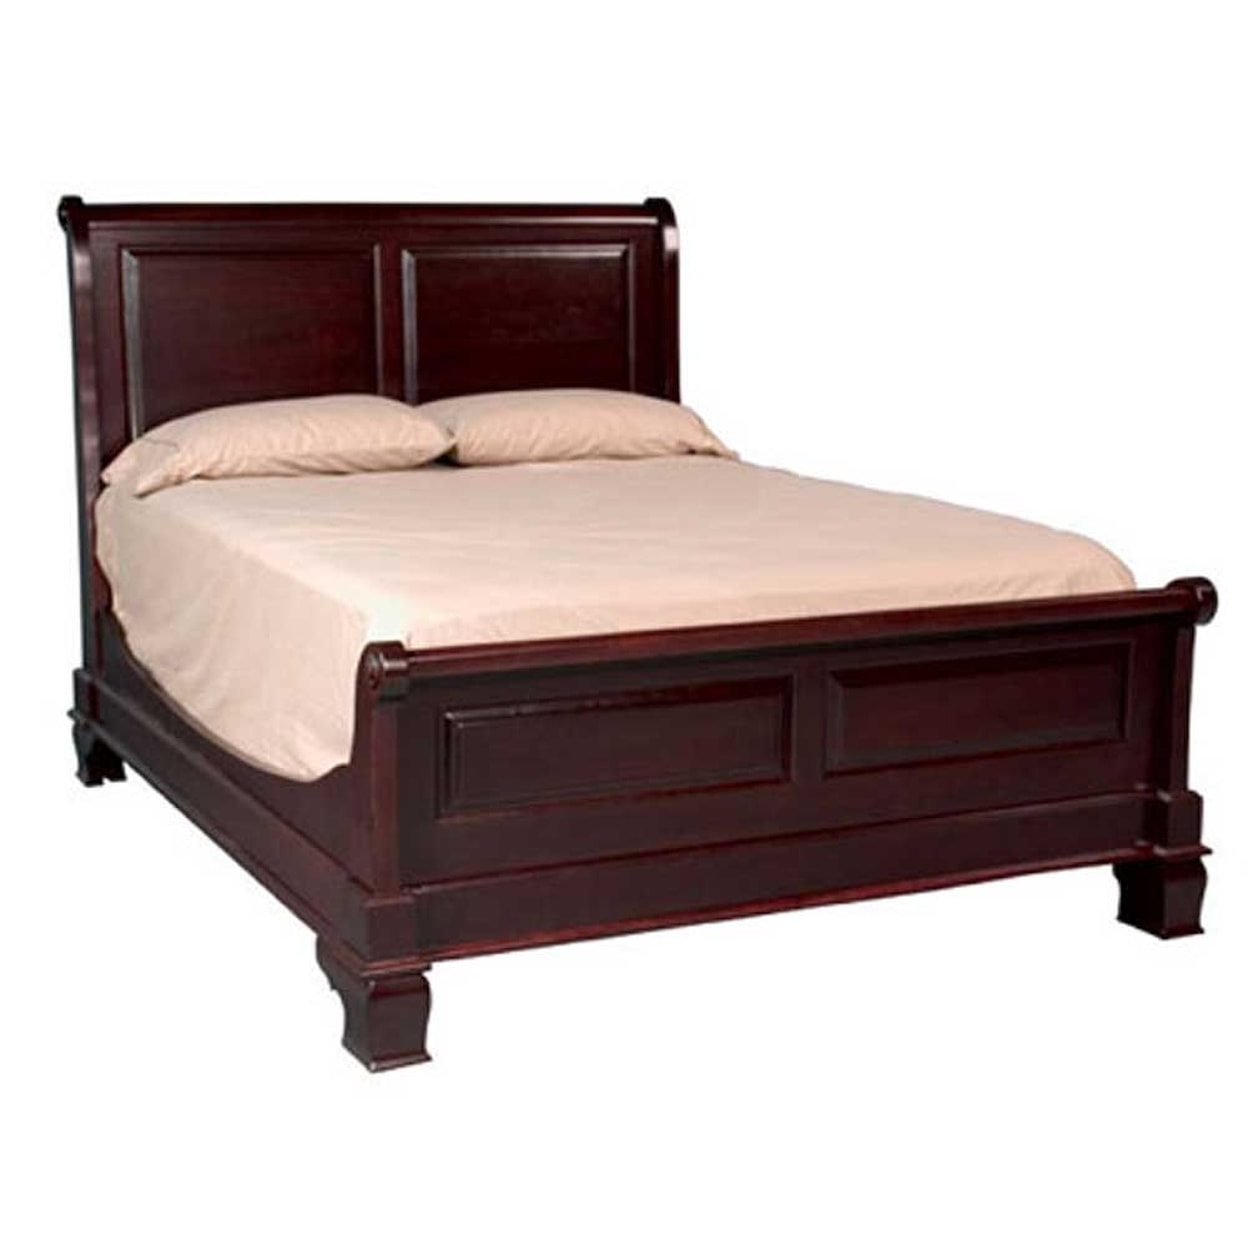 Simply Amish Imperial Amish California King Sleigh Bed